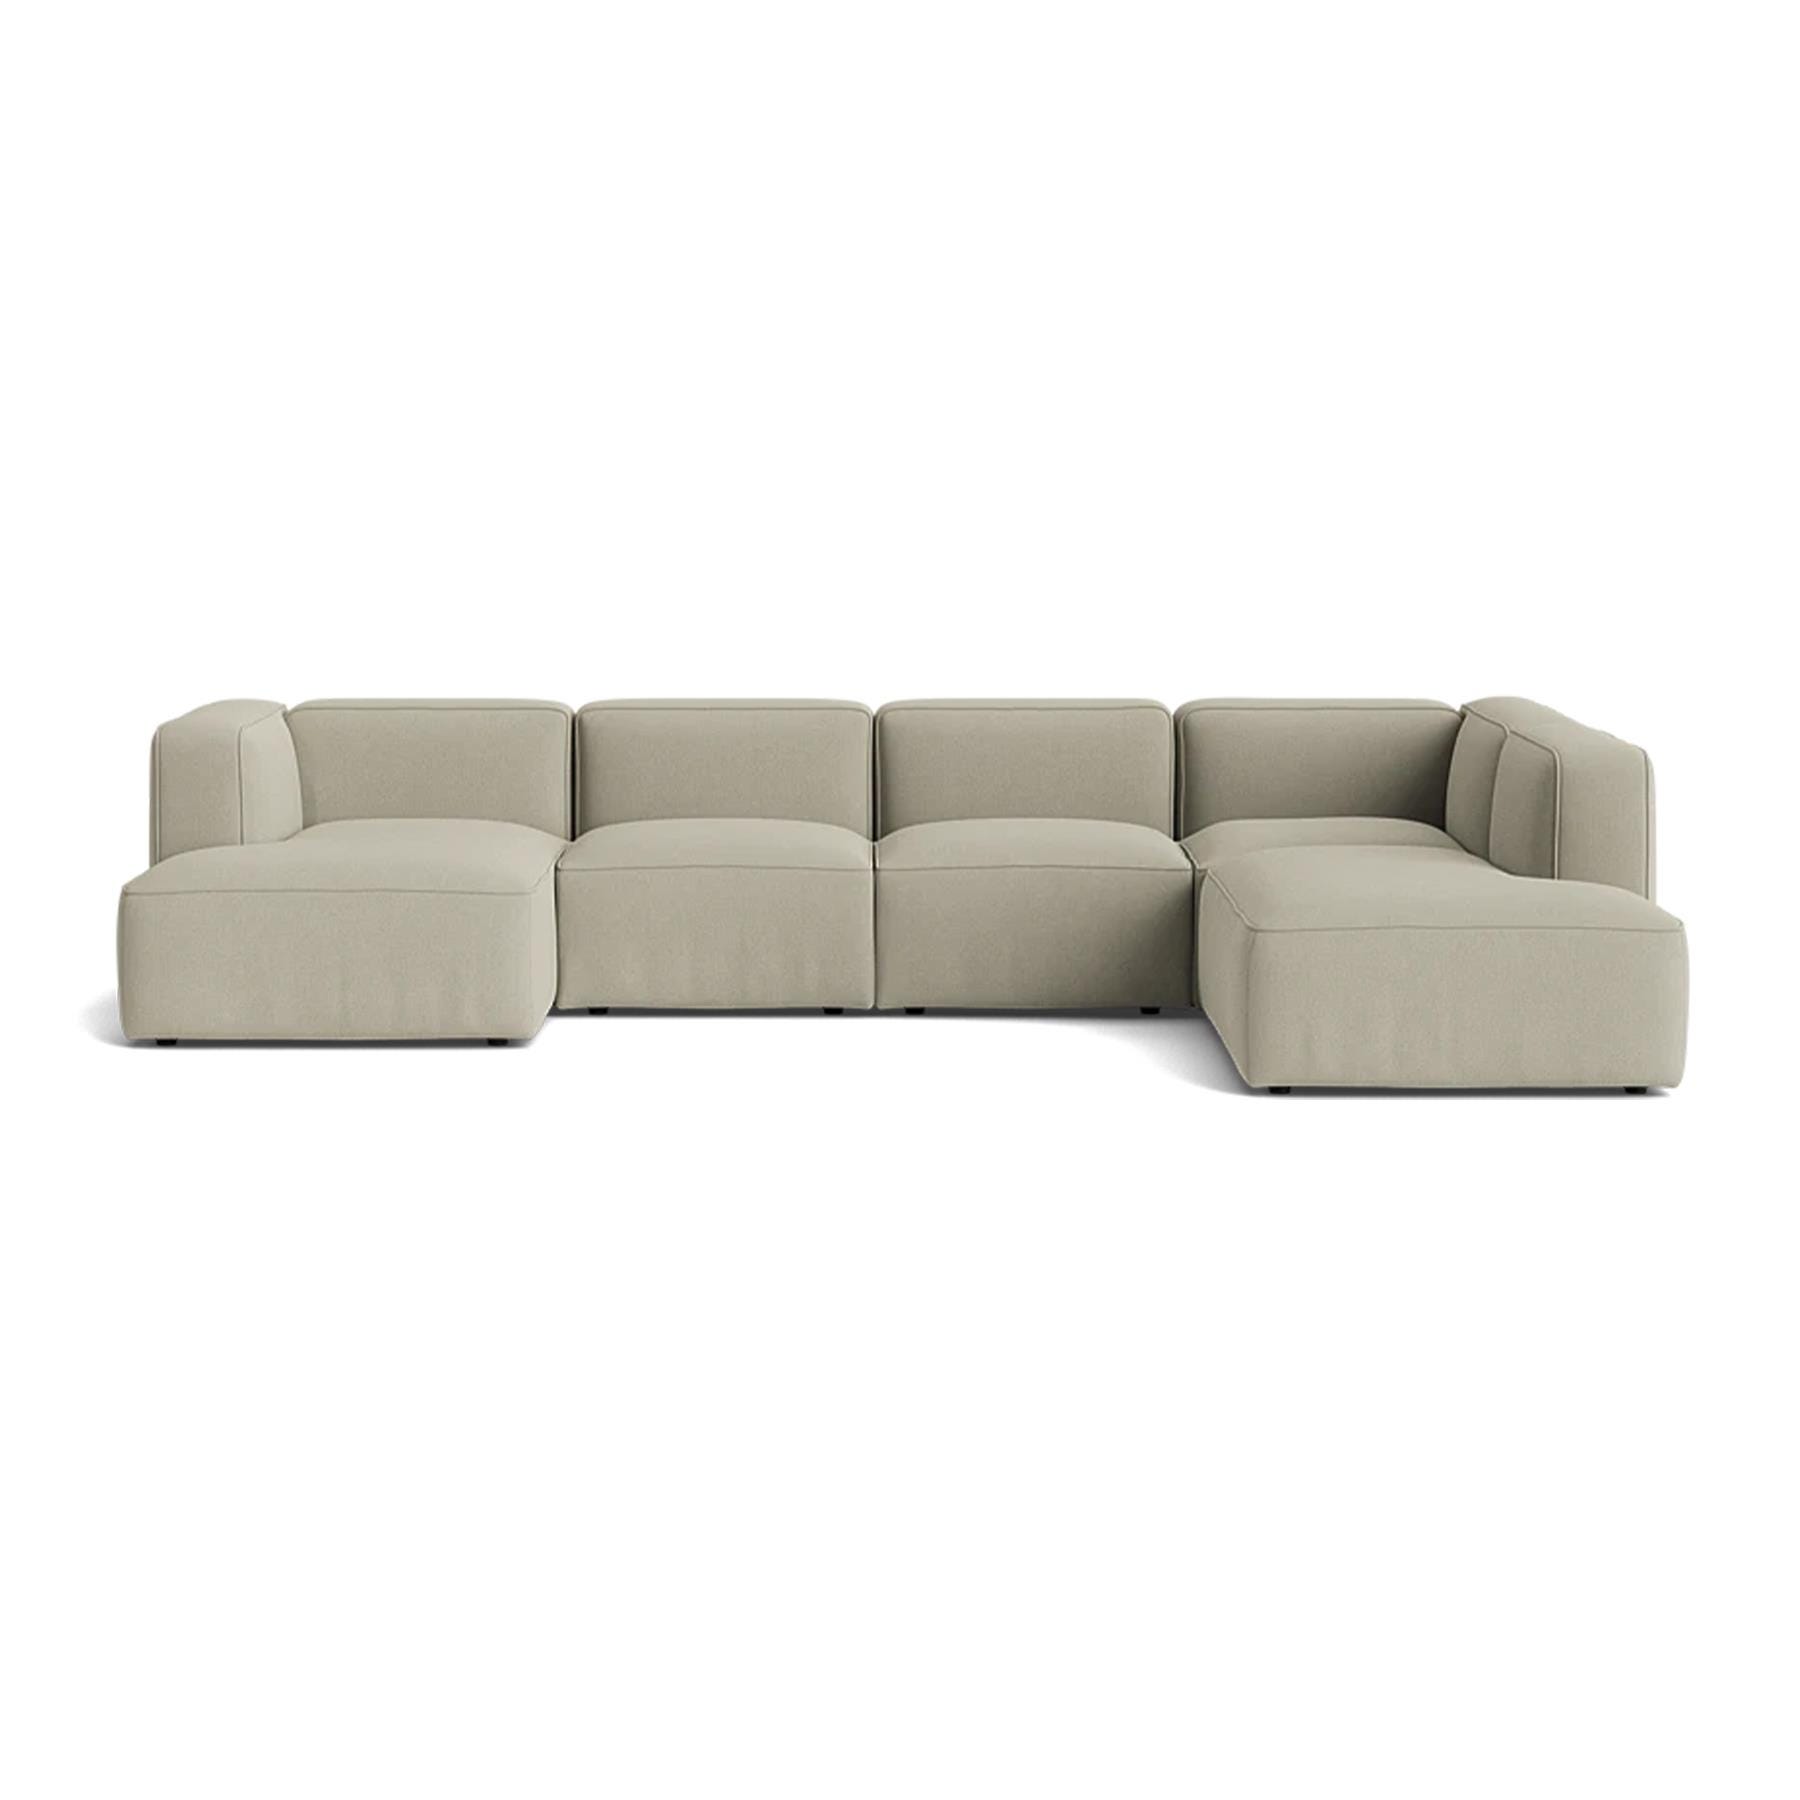 Make Nordic Basecamp Family Sofa Fiord 322 Left Brown Designer Furniture From Holloways Of Ludlow